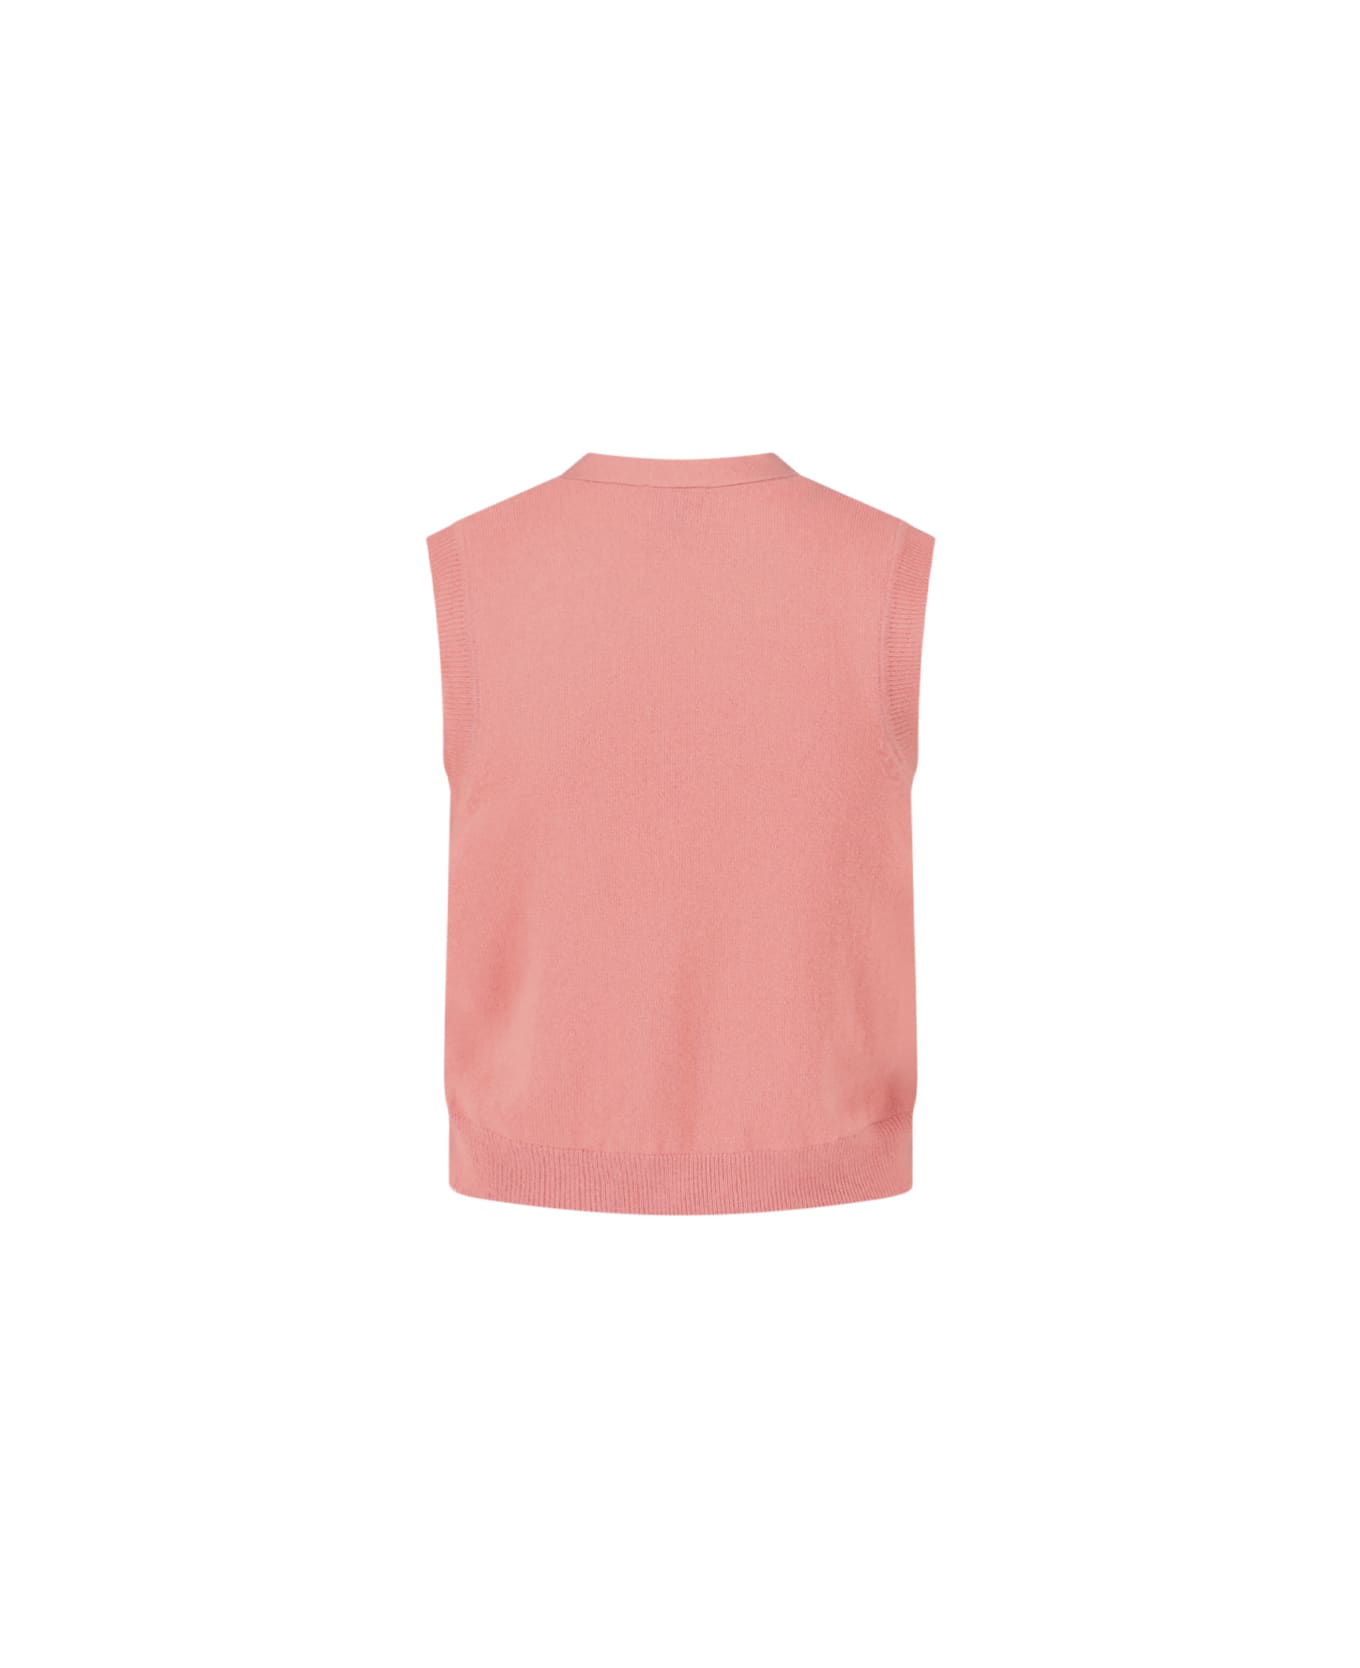 The Garment Sweater - Pink